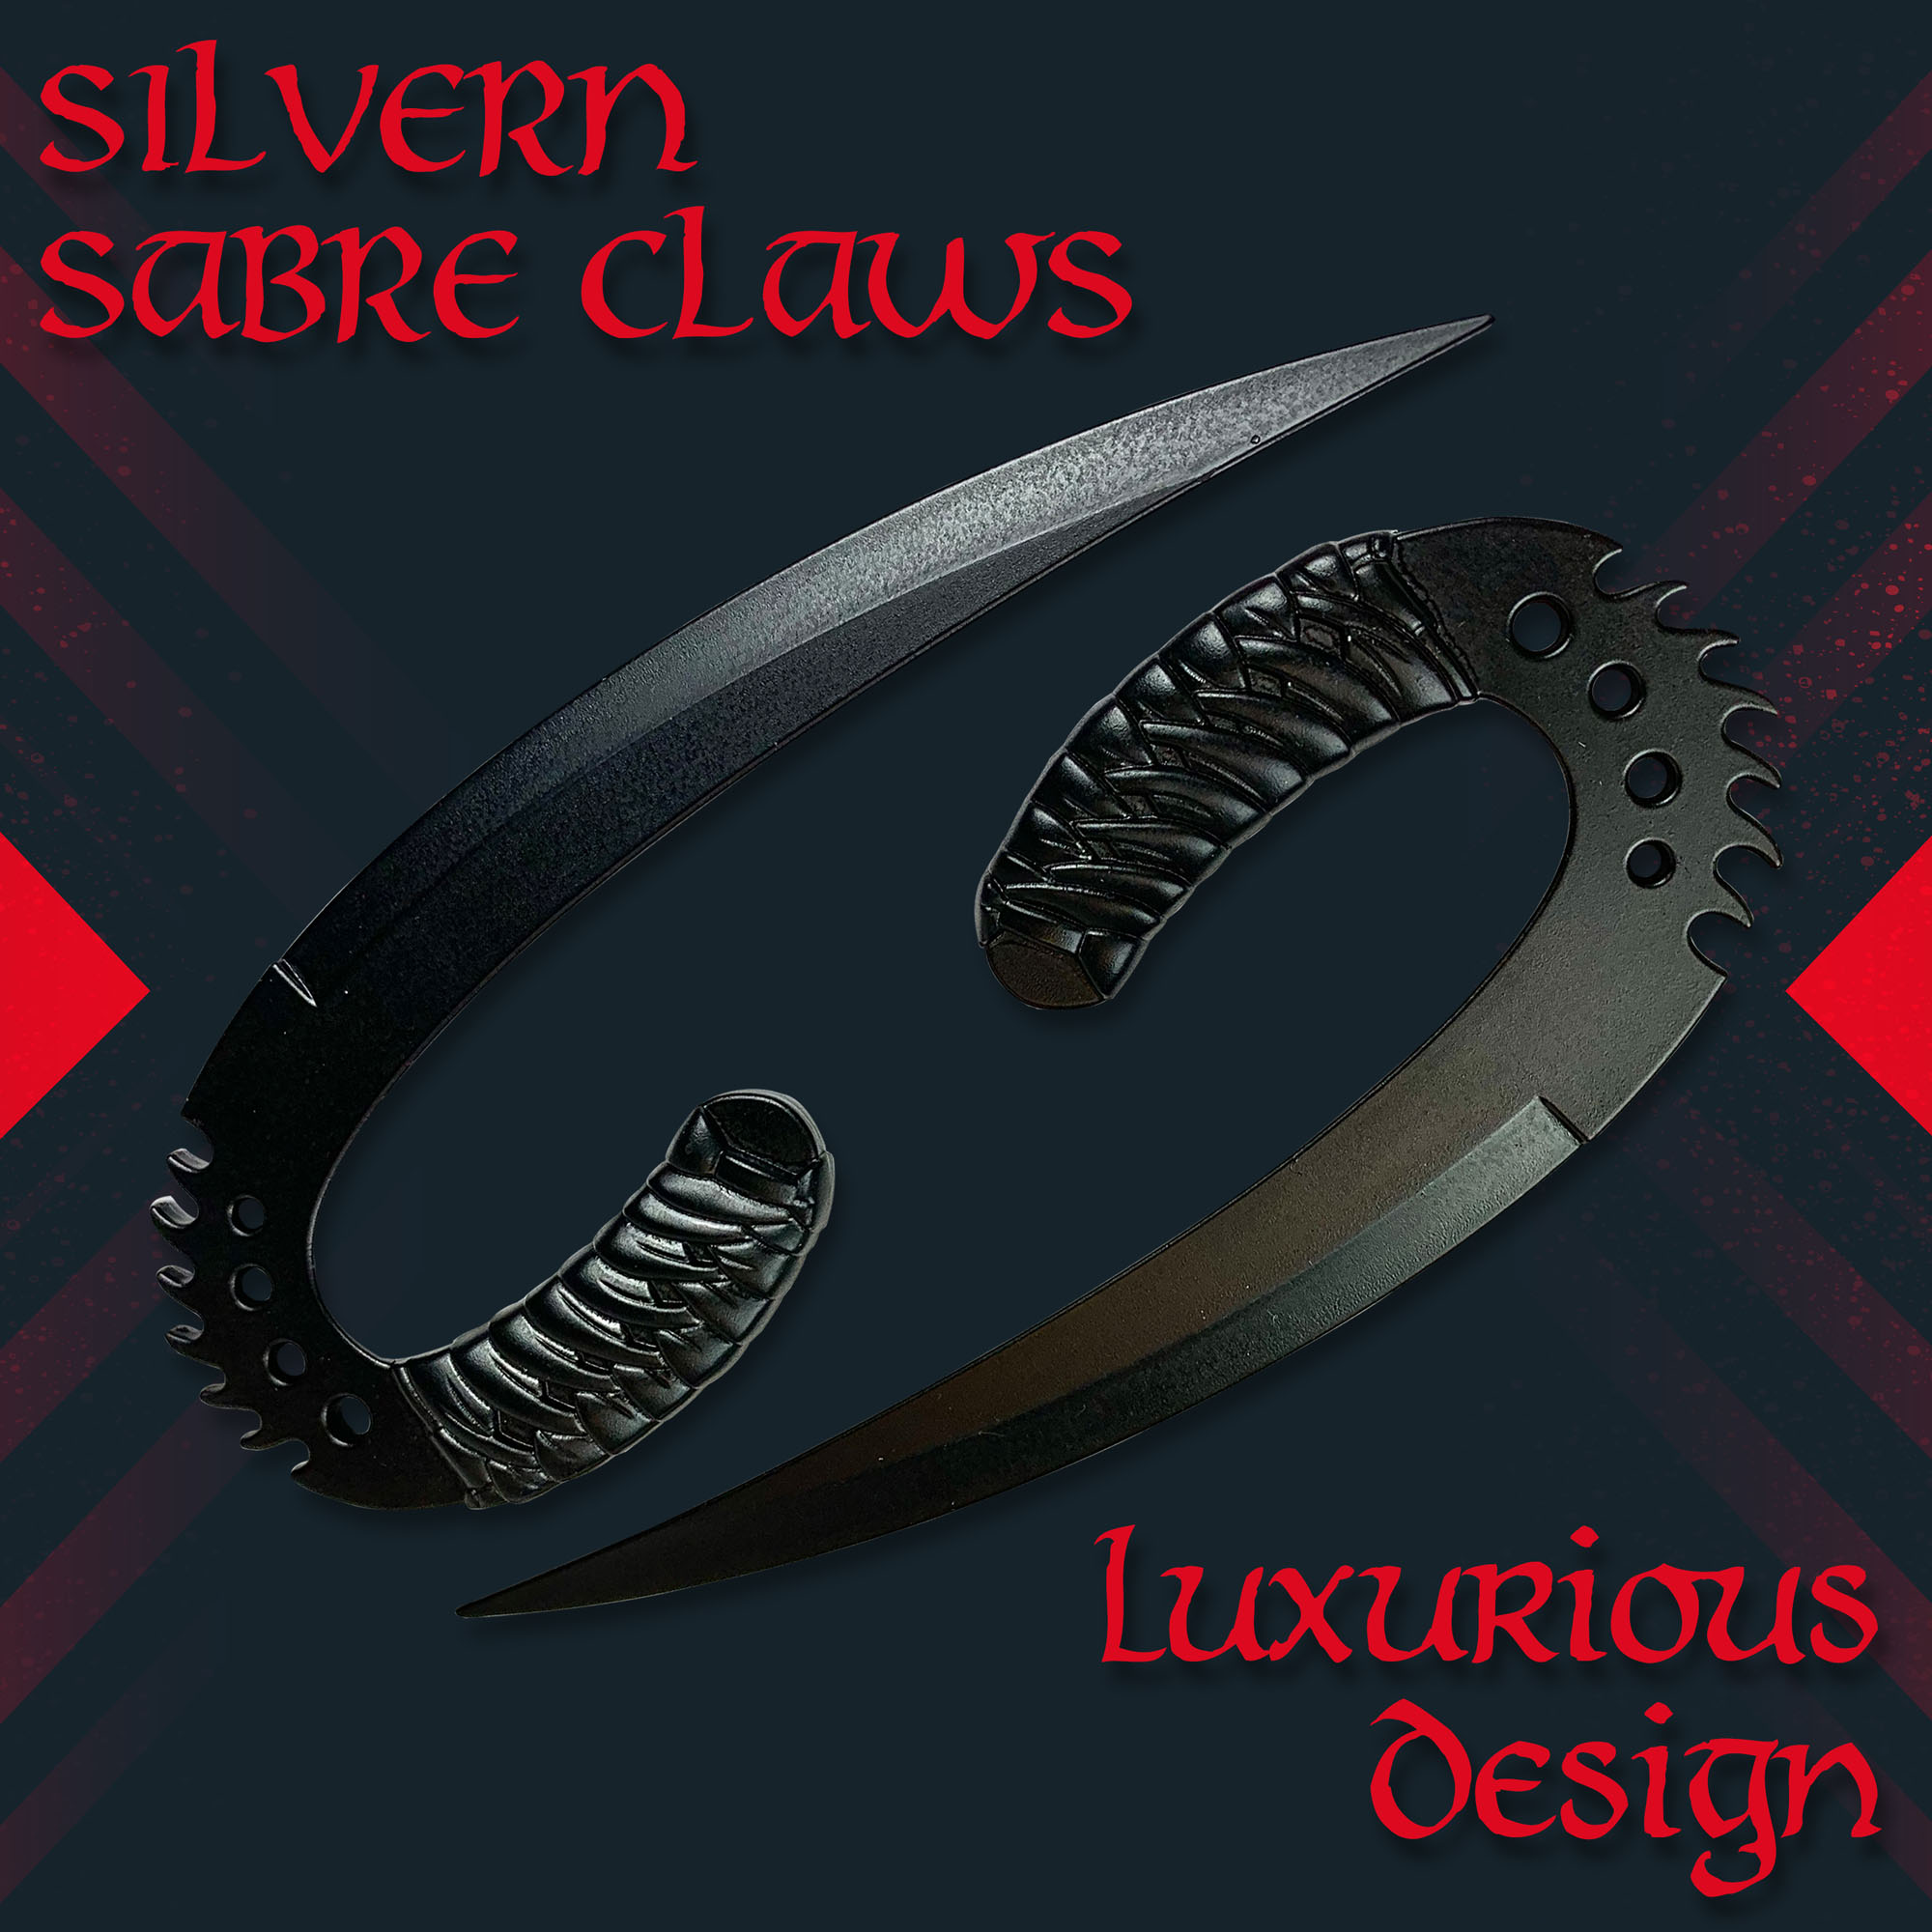 The Chronicles of Riddick - Saber Claws letter opener version 